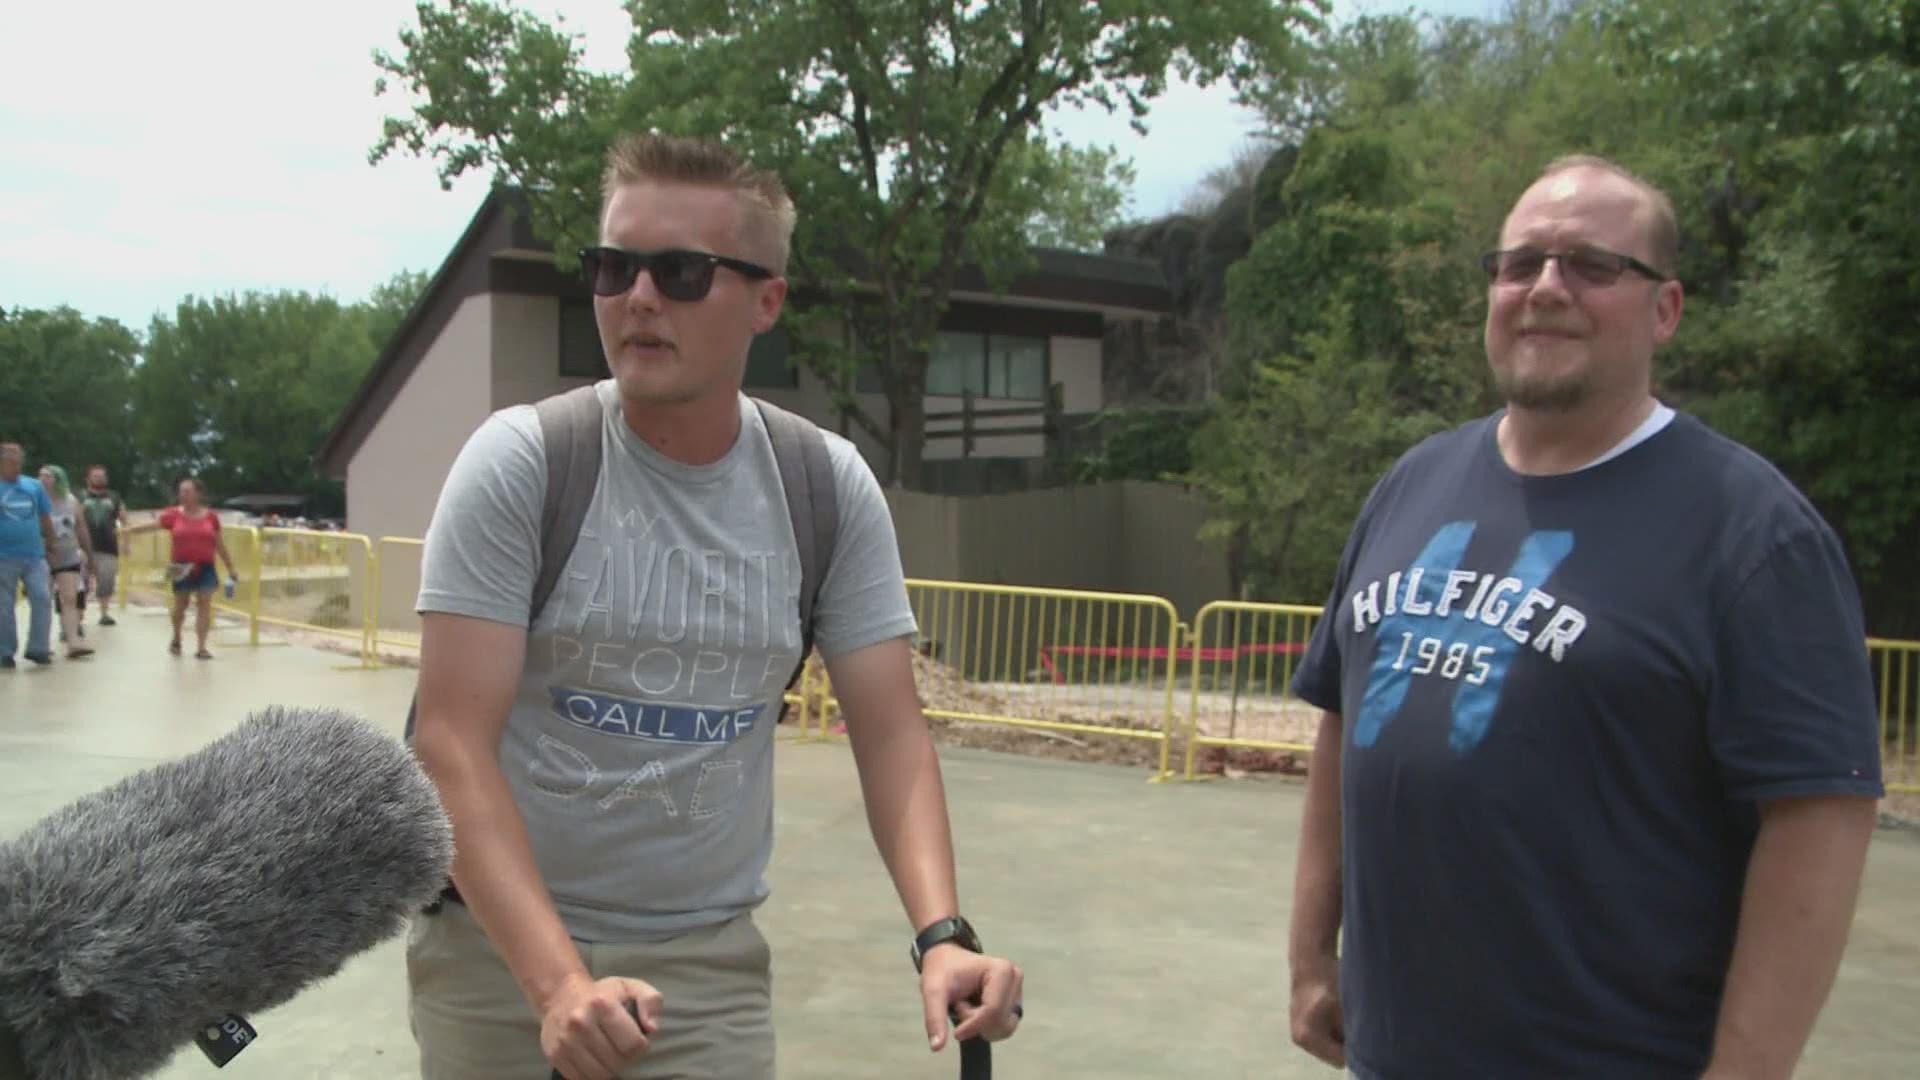 SOME EAST TENNESSEE FAMILIES SPENT THIS FATHER'S DAY CELEBRATING DAD AT THE ZOO.